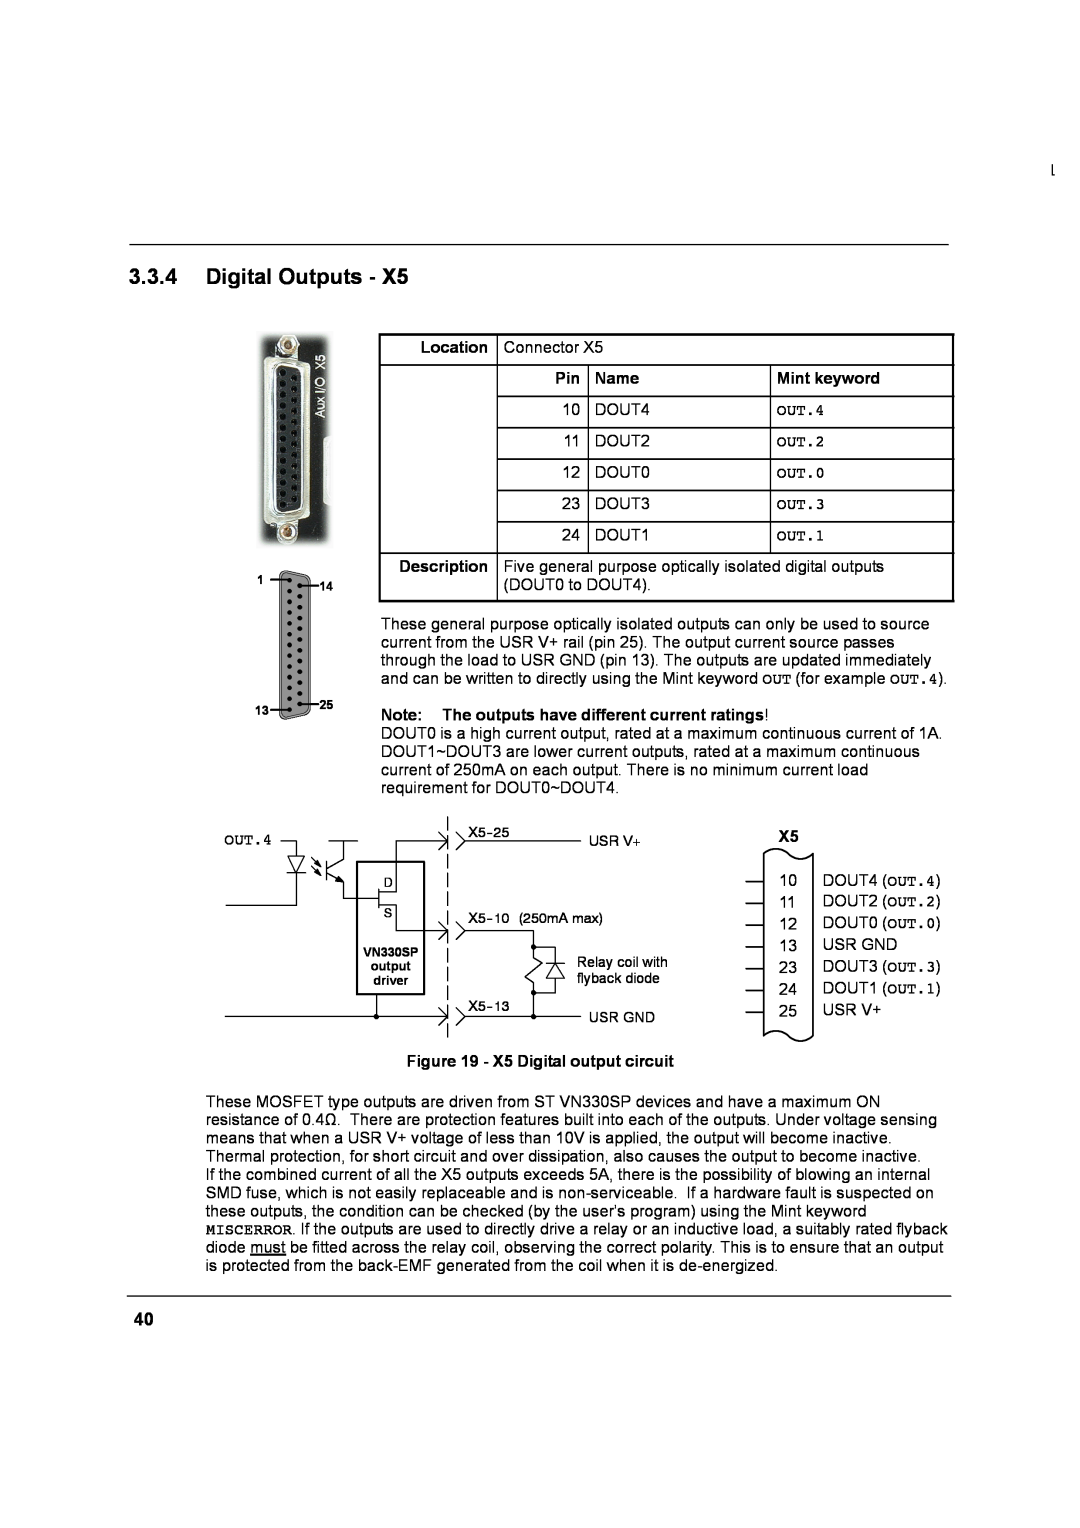 Baldor MN1274 06/2001 installation manual Digital Outputs, Relay coil with flyback diode, Usr Gnd 